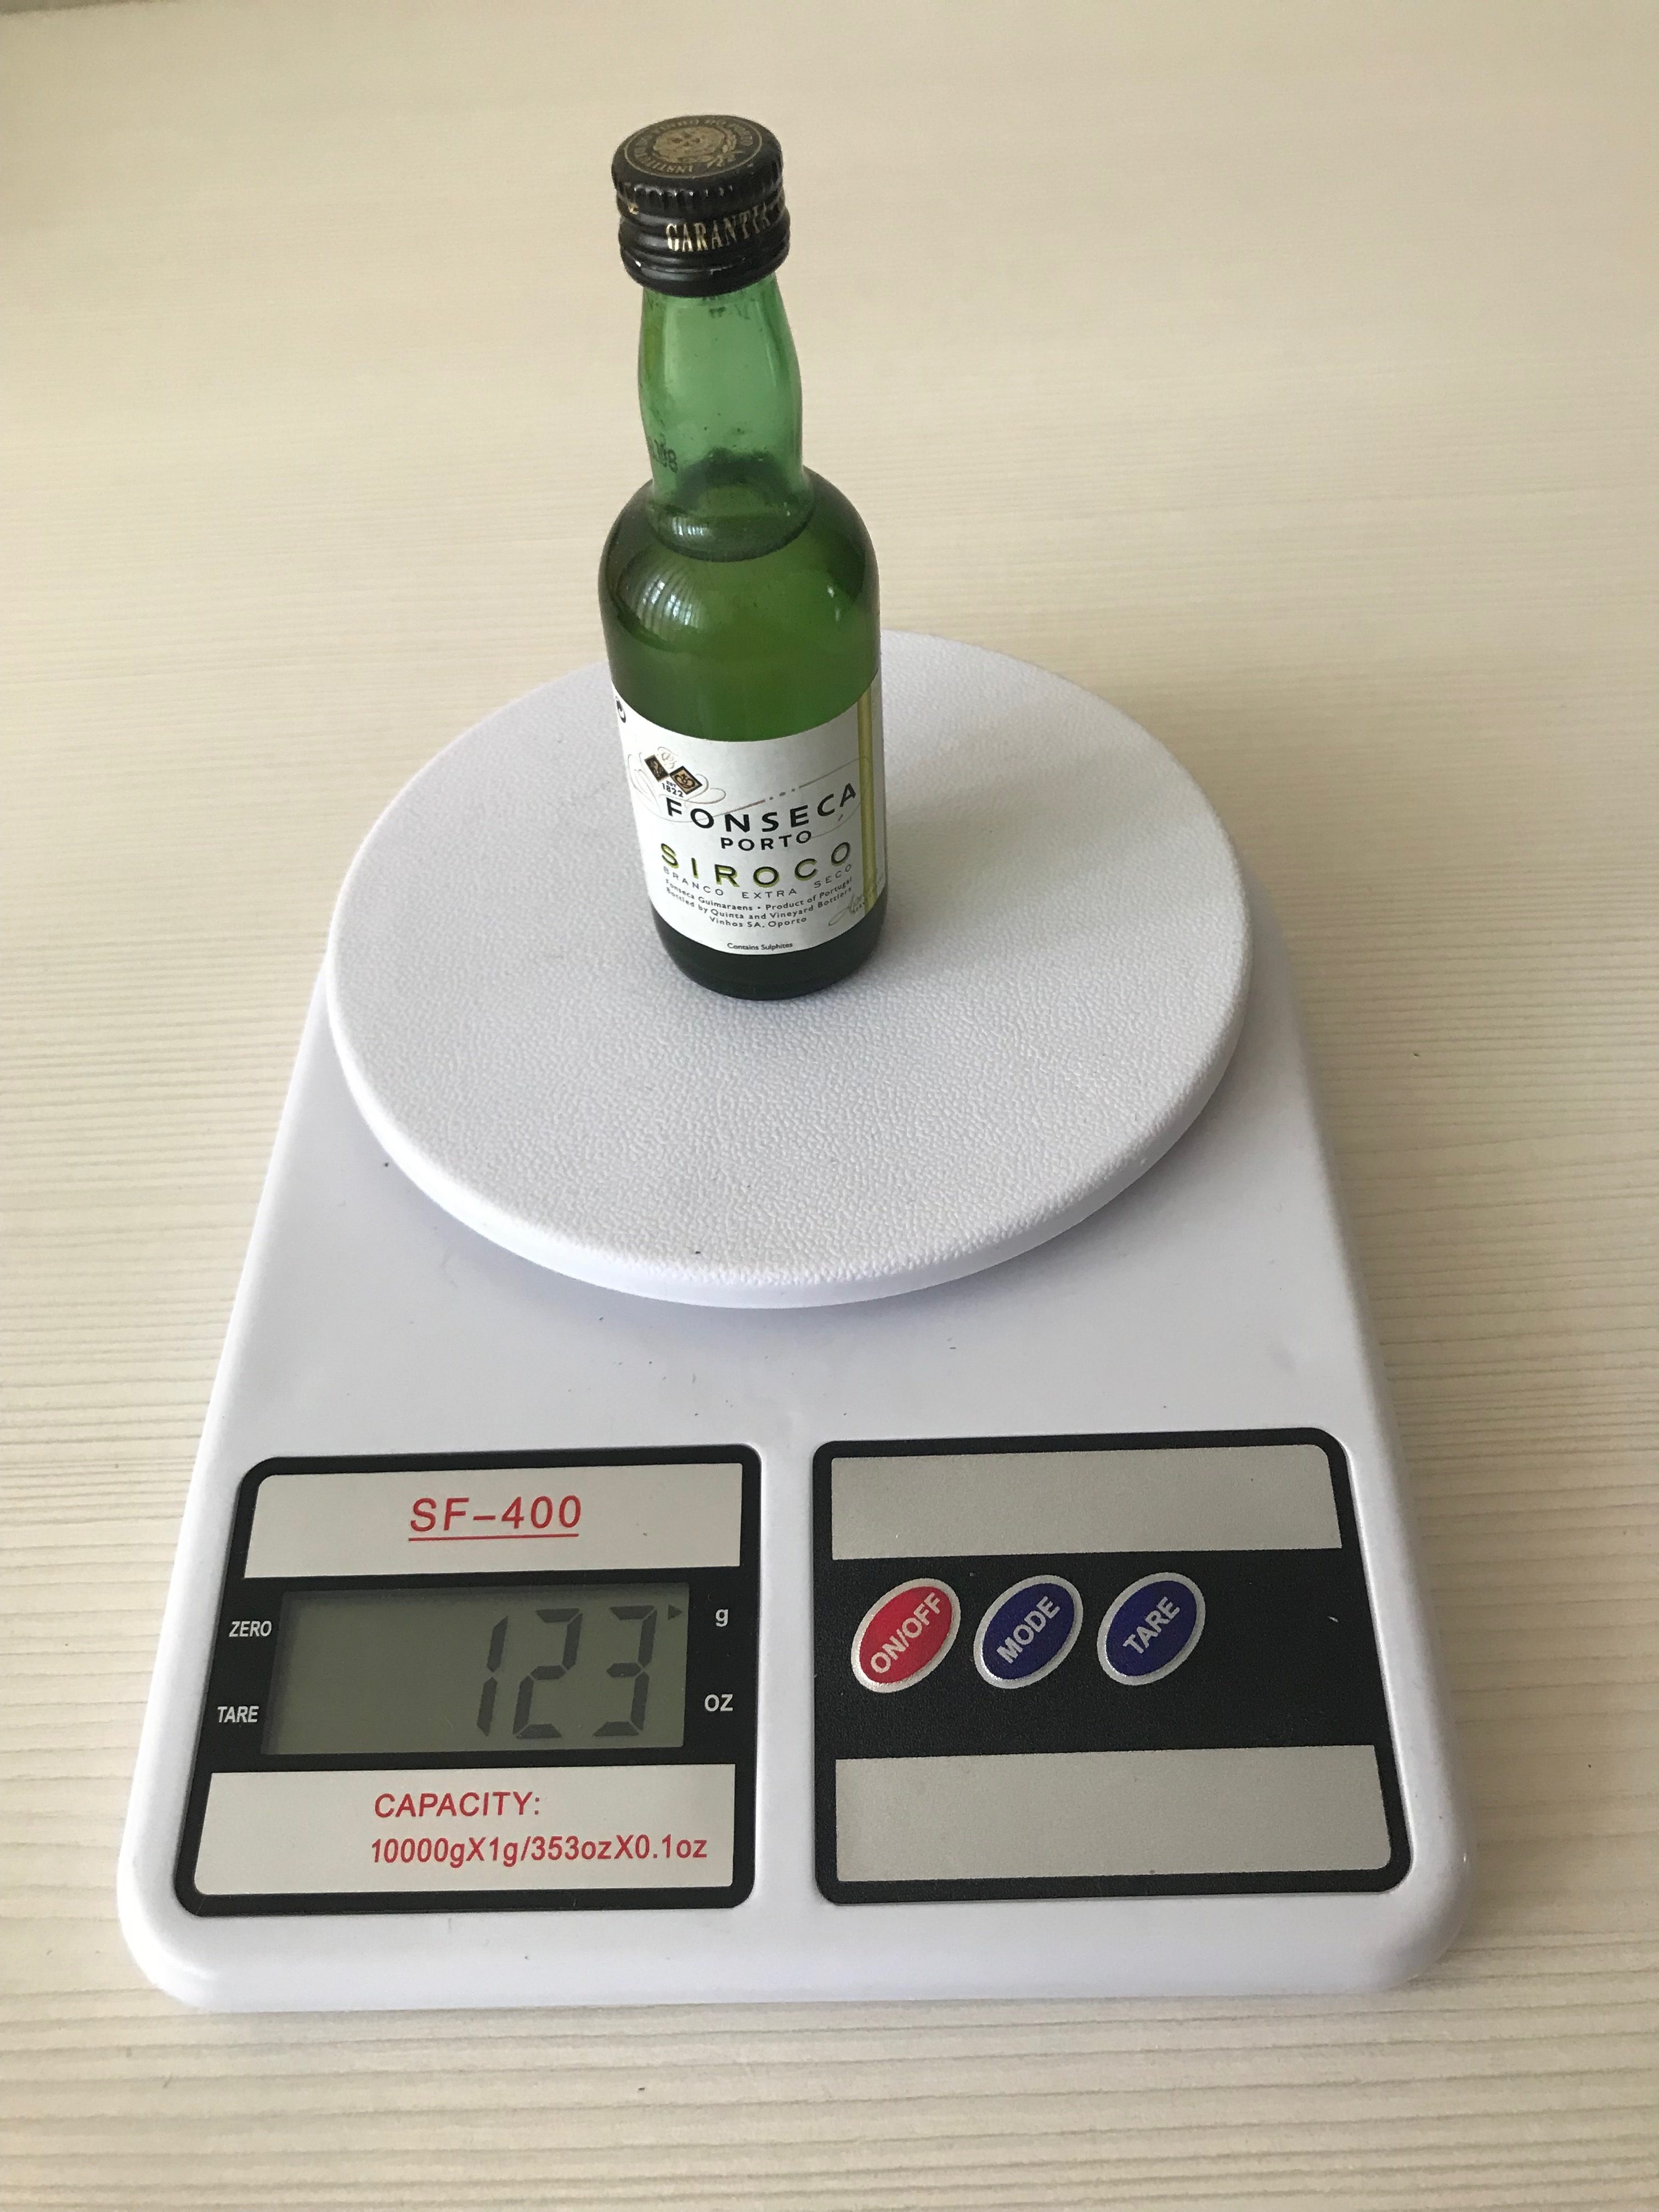 the weight of the mini bottle from the bar